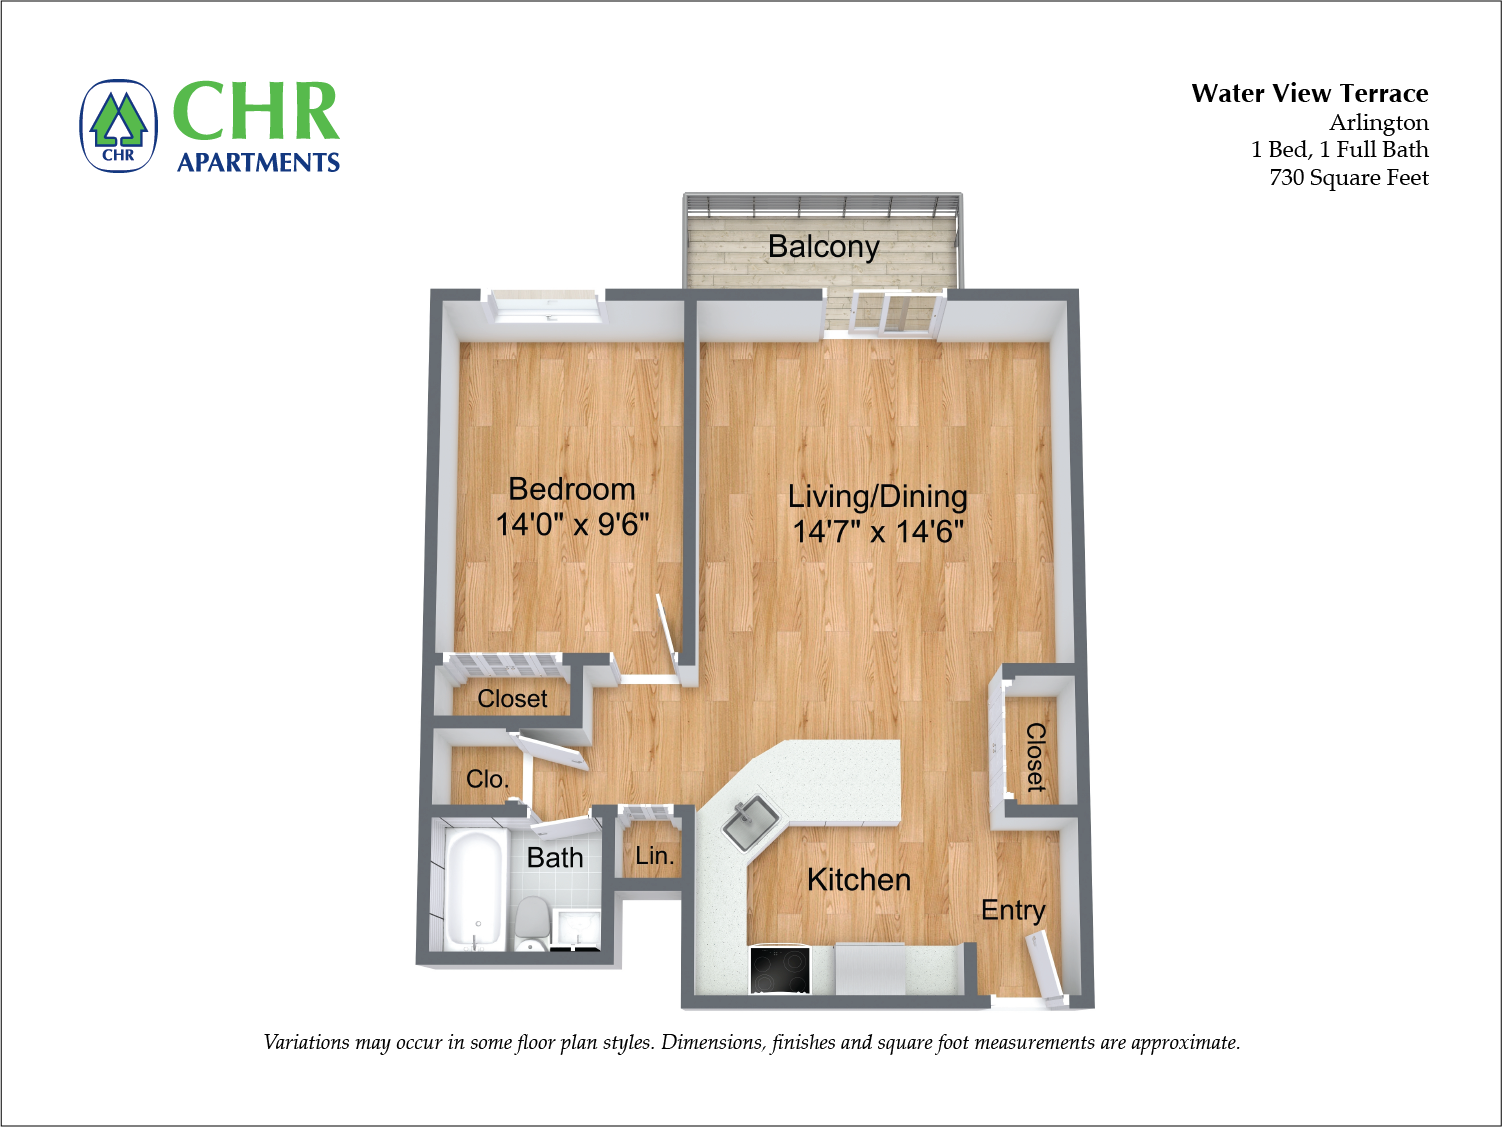 Click to view 1 Bed/1 Bath with Balcony and A/C floor plan gallery